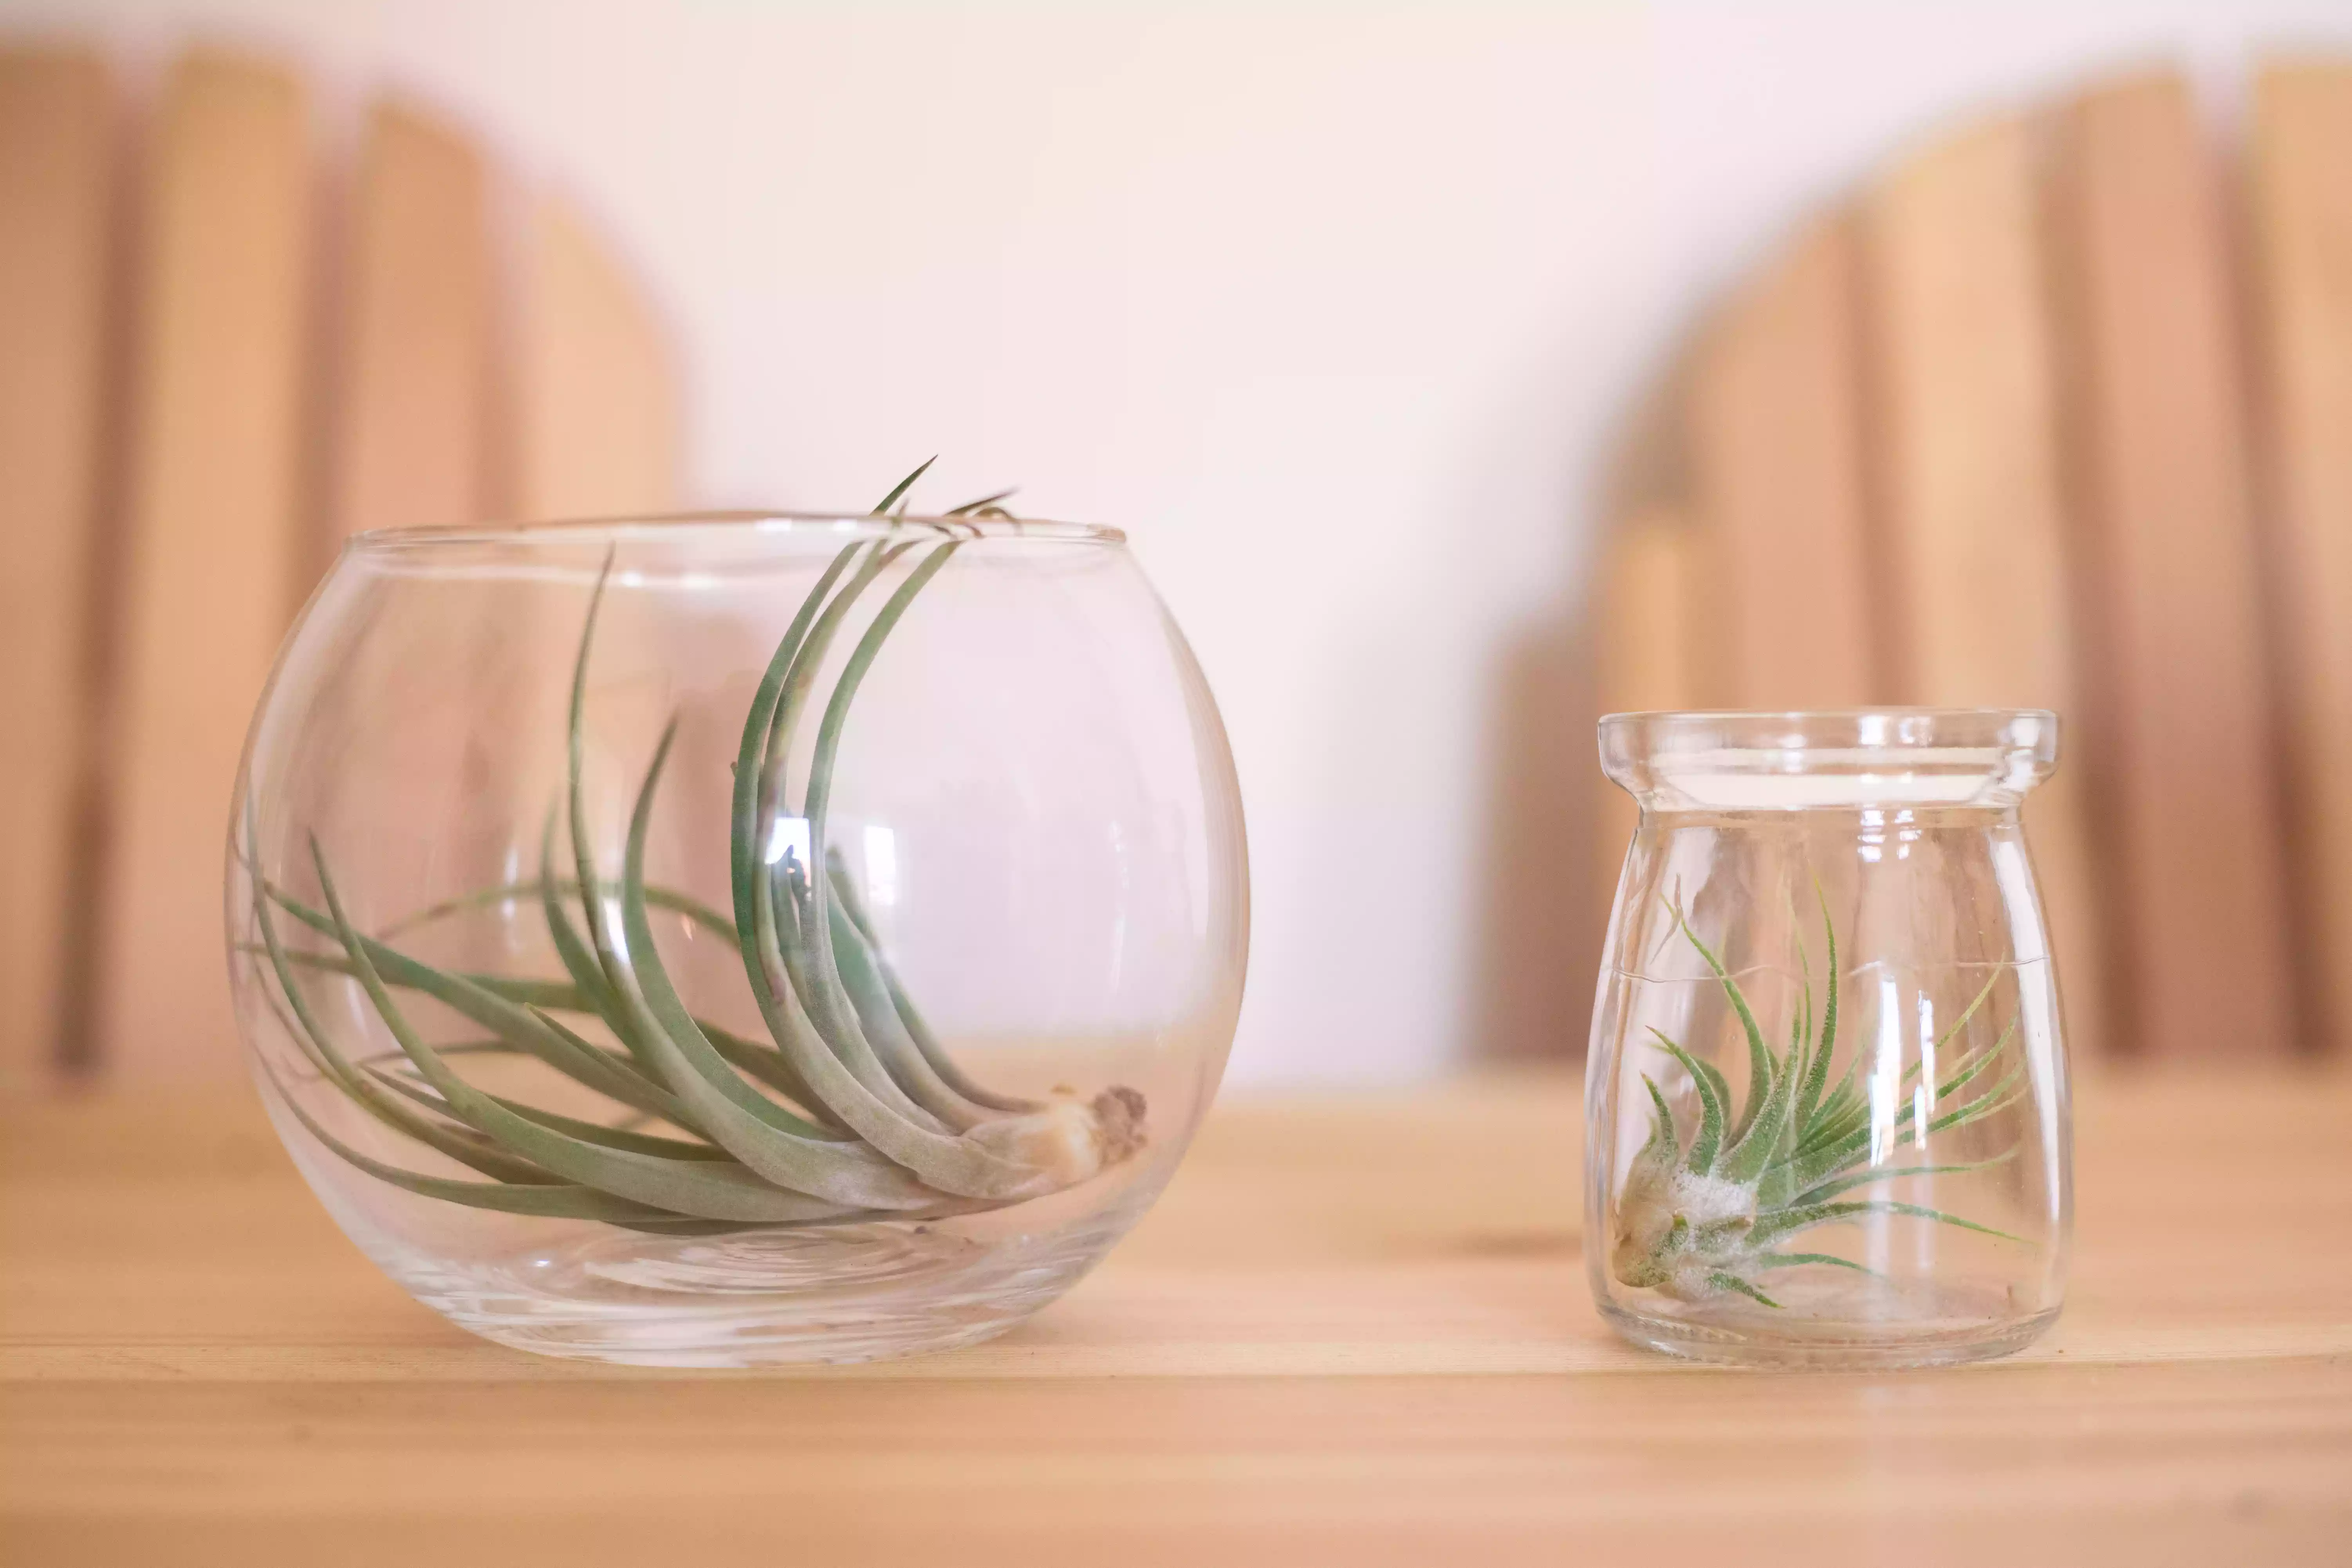 two air plants in glass containers sit on wooden table with Adirondack chairs in background